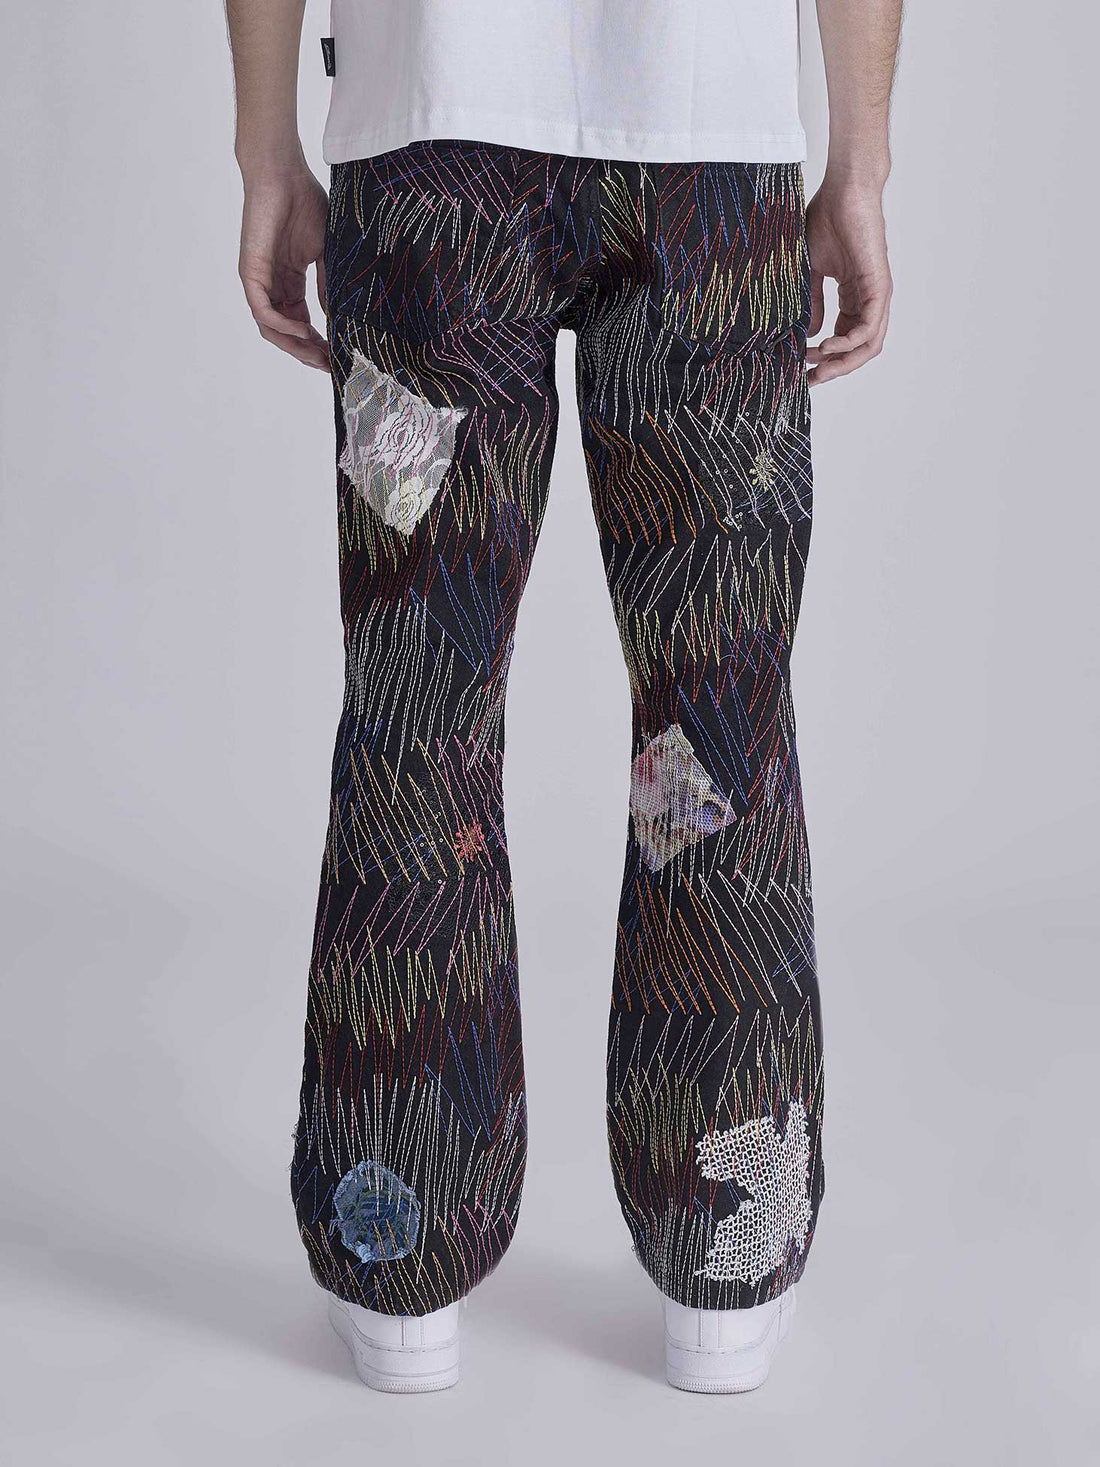 Jeans modello "Embroidery" Effemme Exclusive Lab